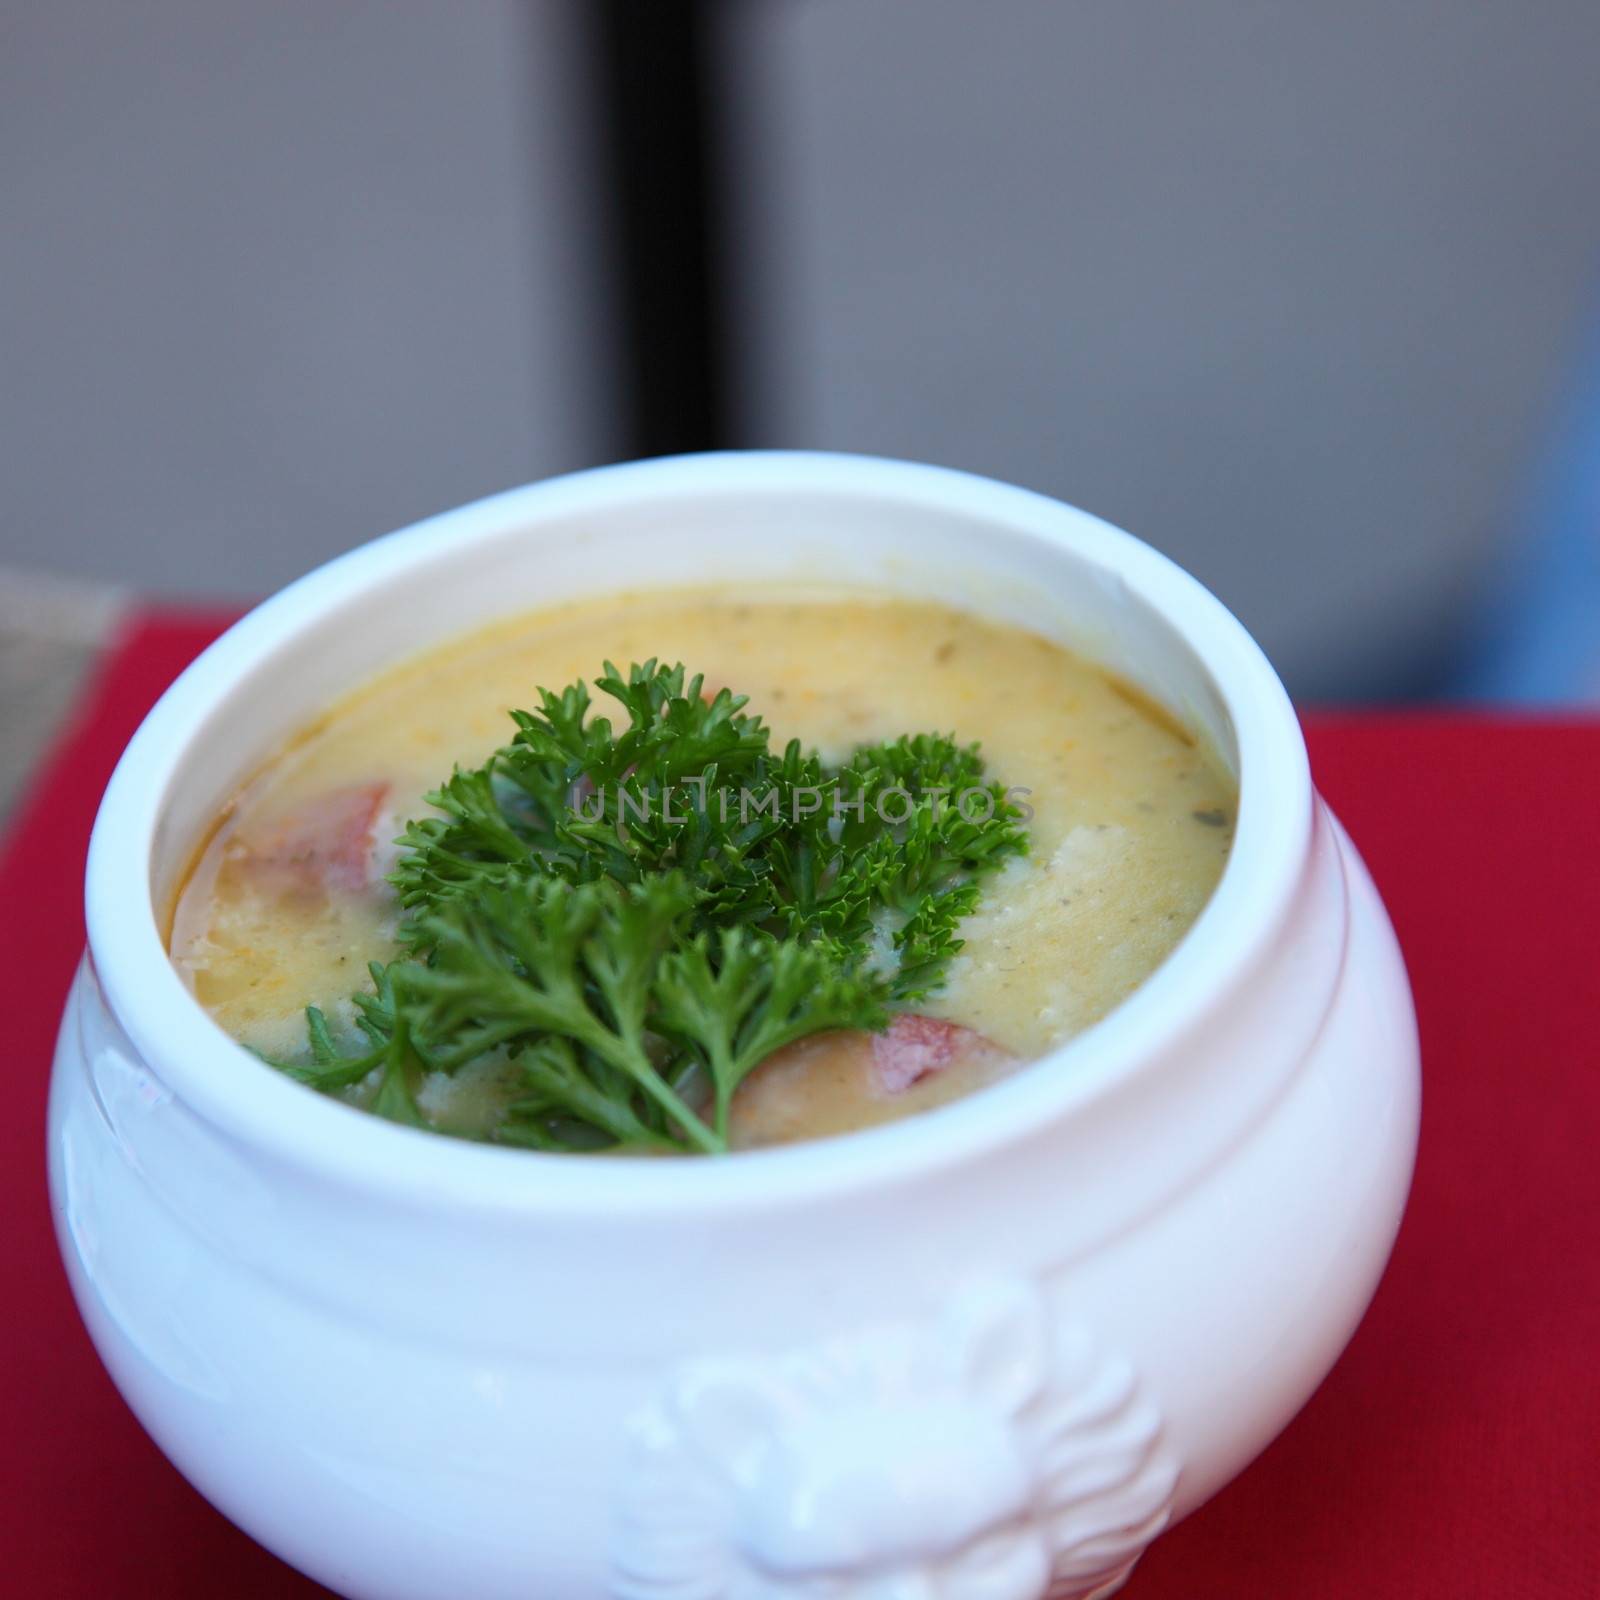 Bowl of hot creamy soup garnished with parsley on a table served as a starter or appetizer to a winter meal